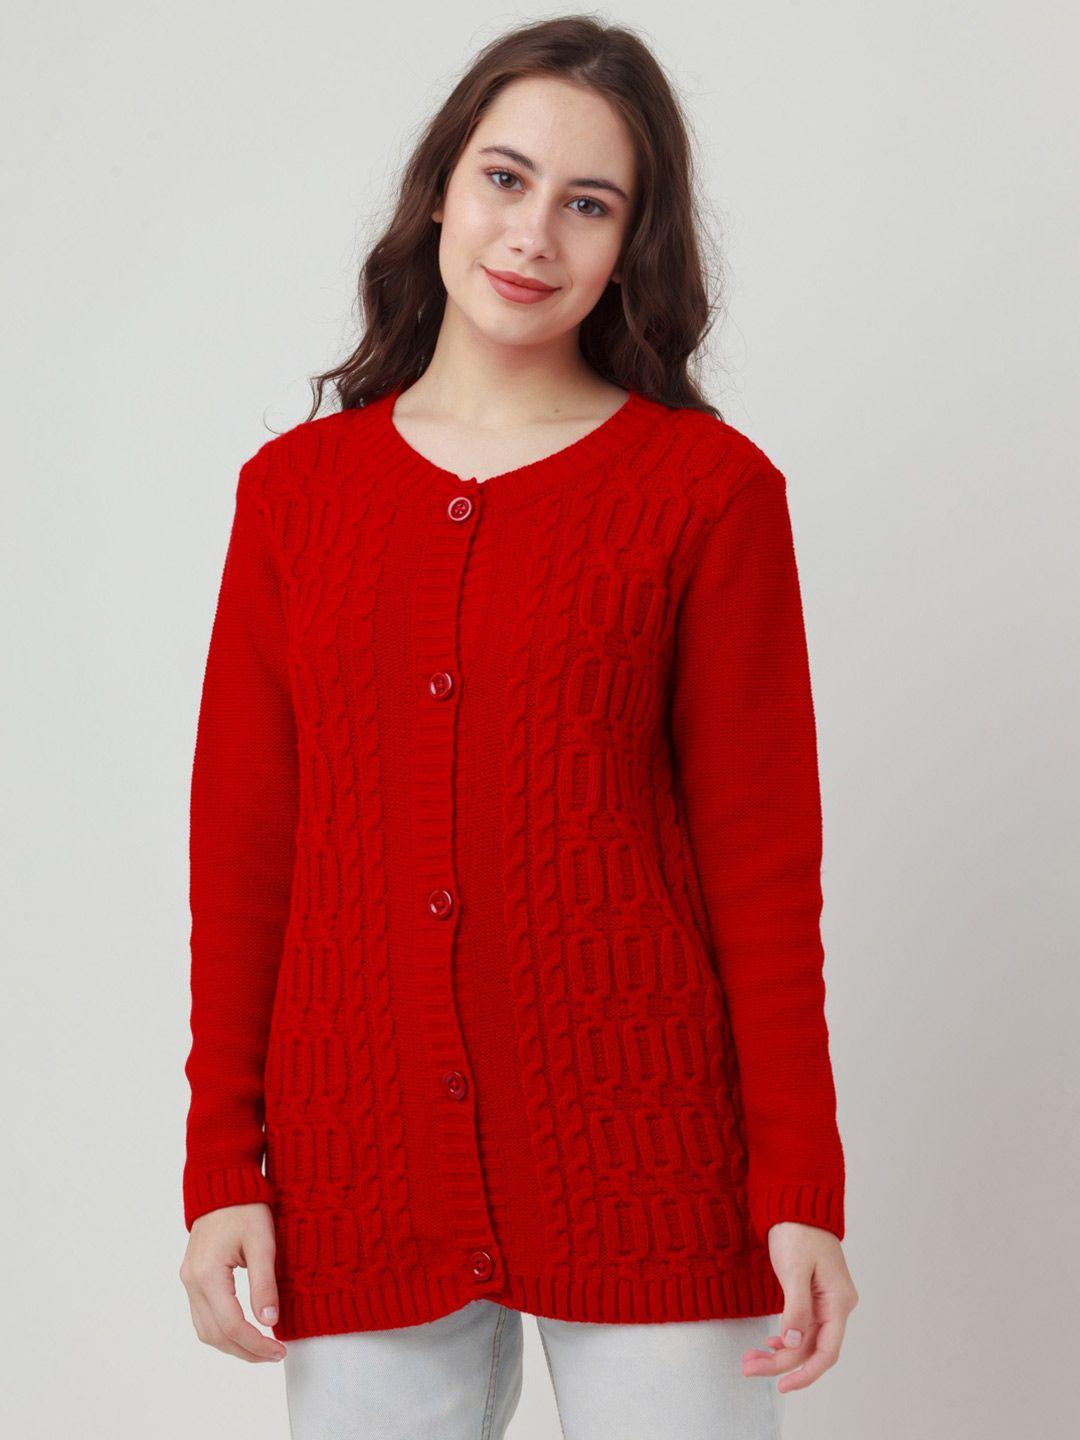 zink london women red cable knit acrylic cardigan